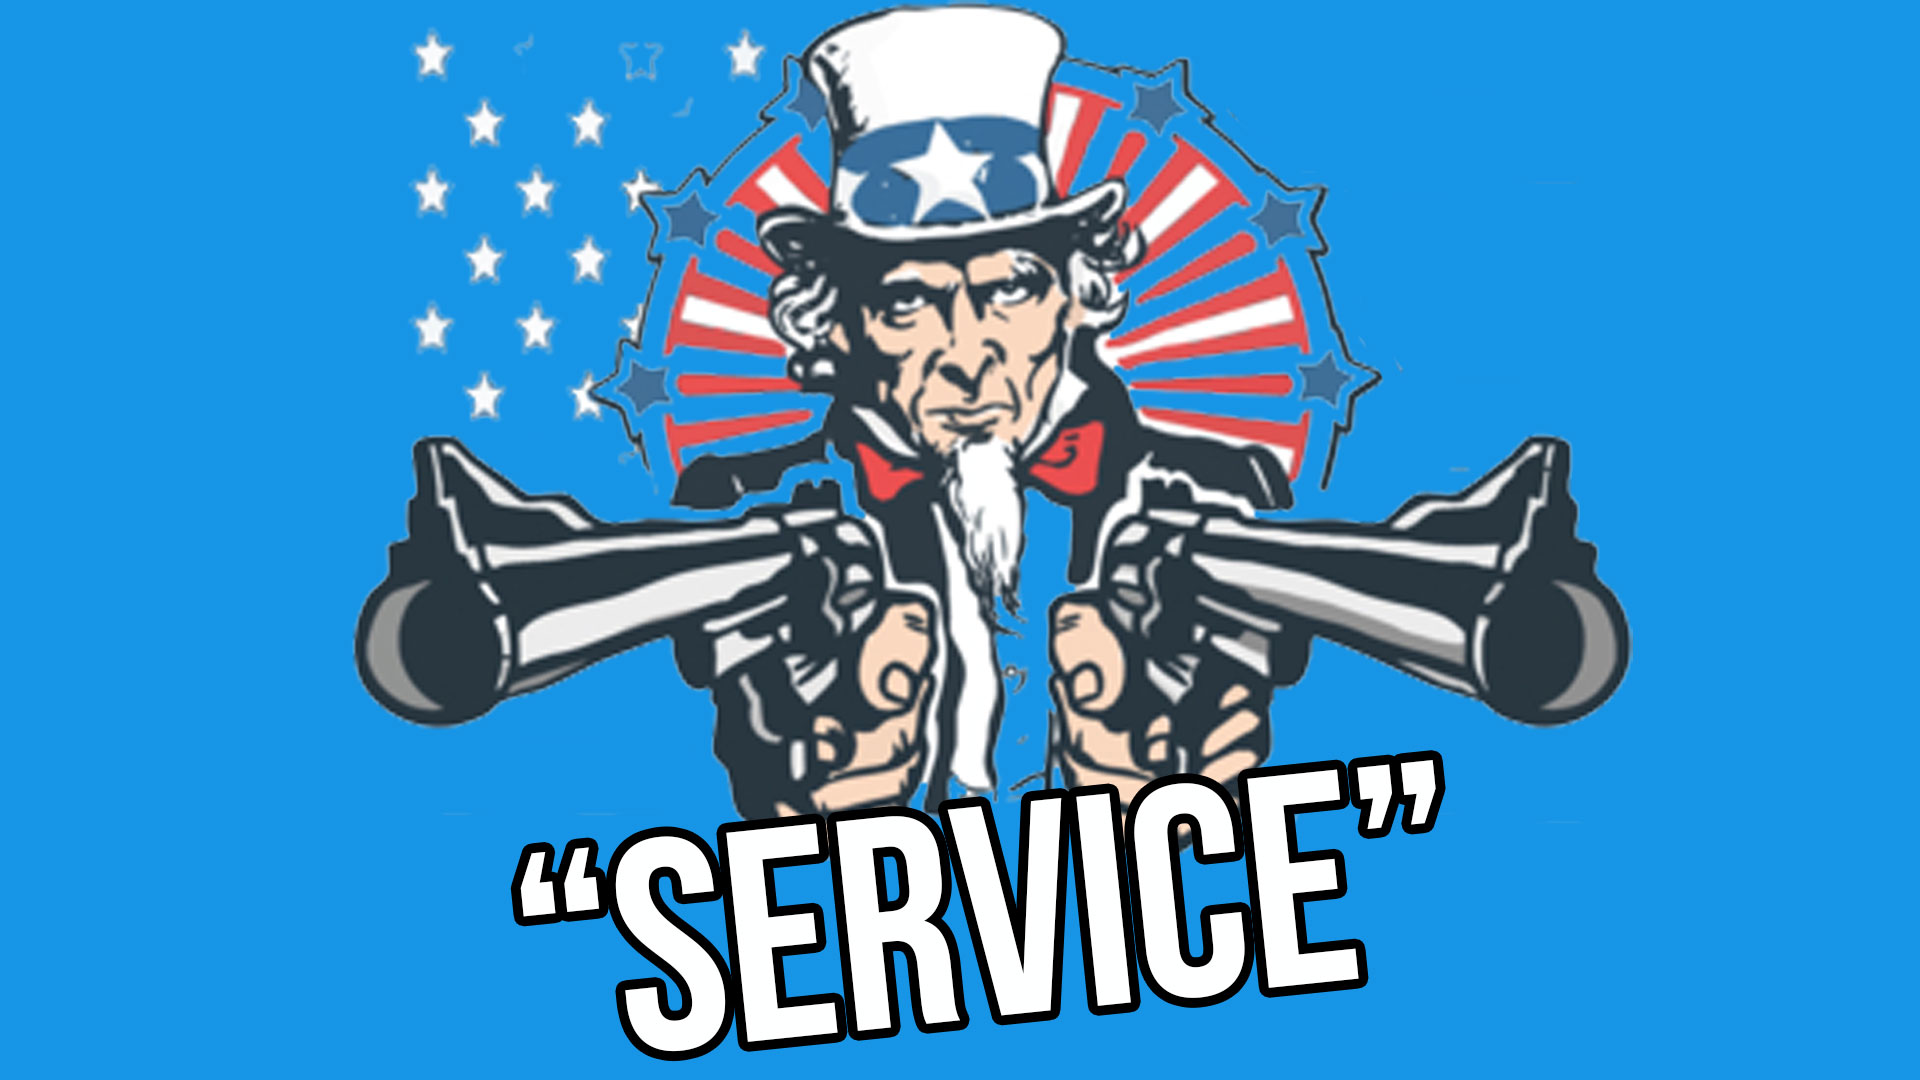 Is Civil Service Really Civil or Service?